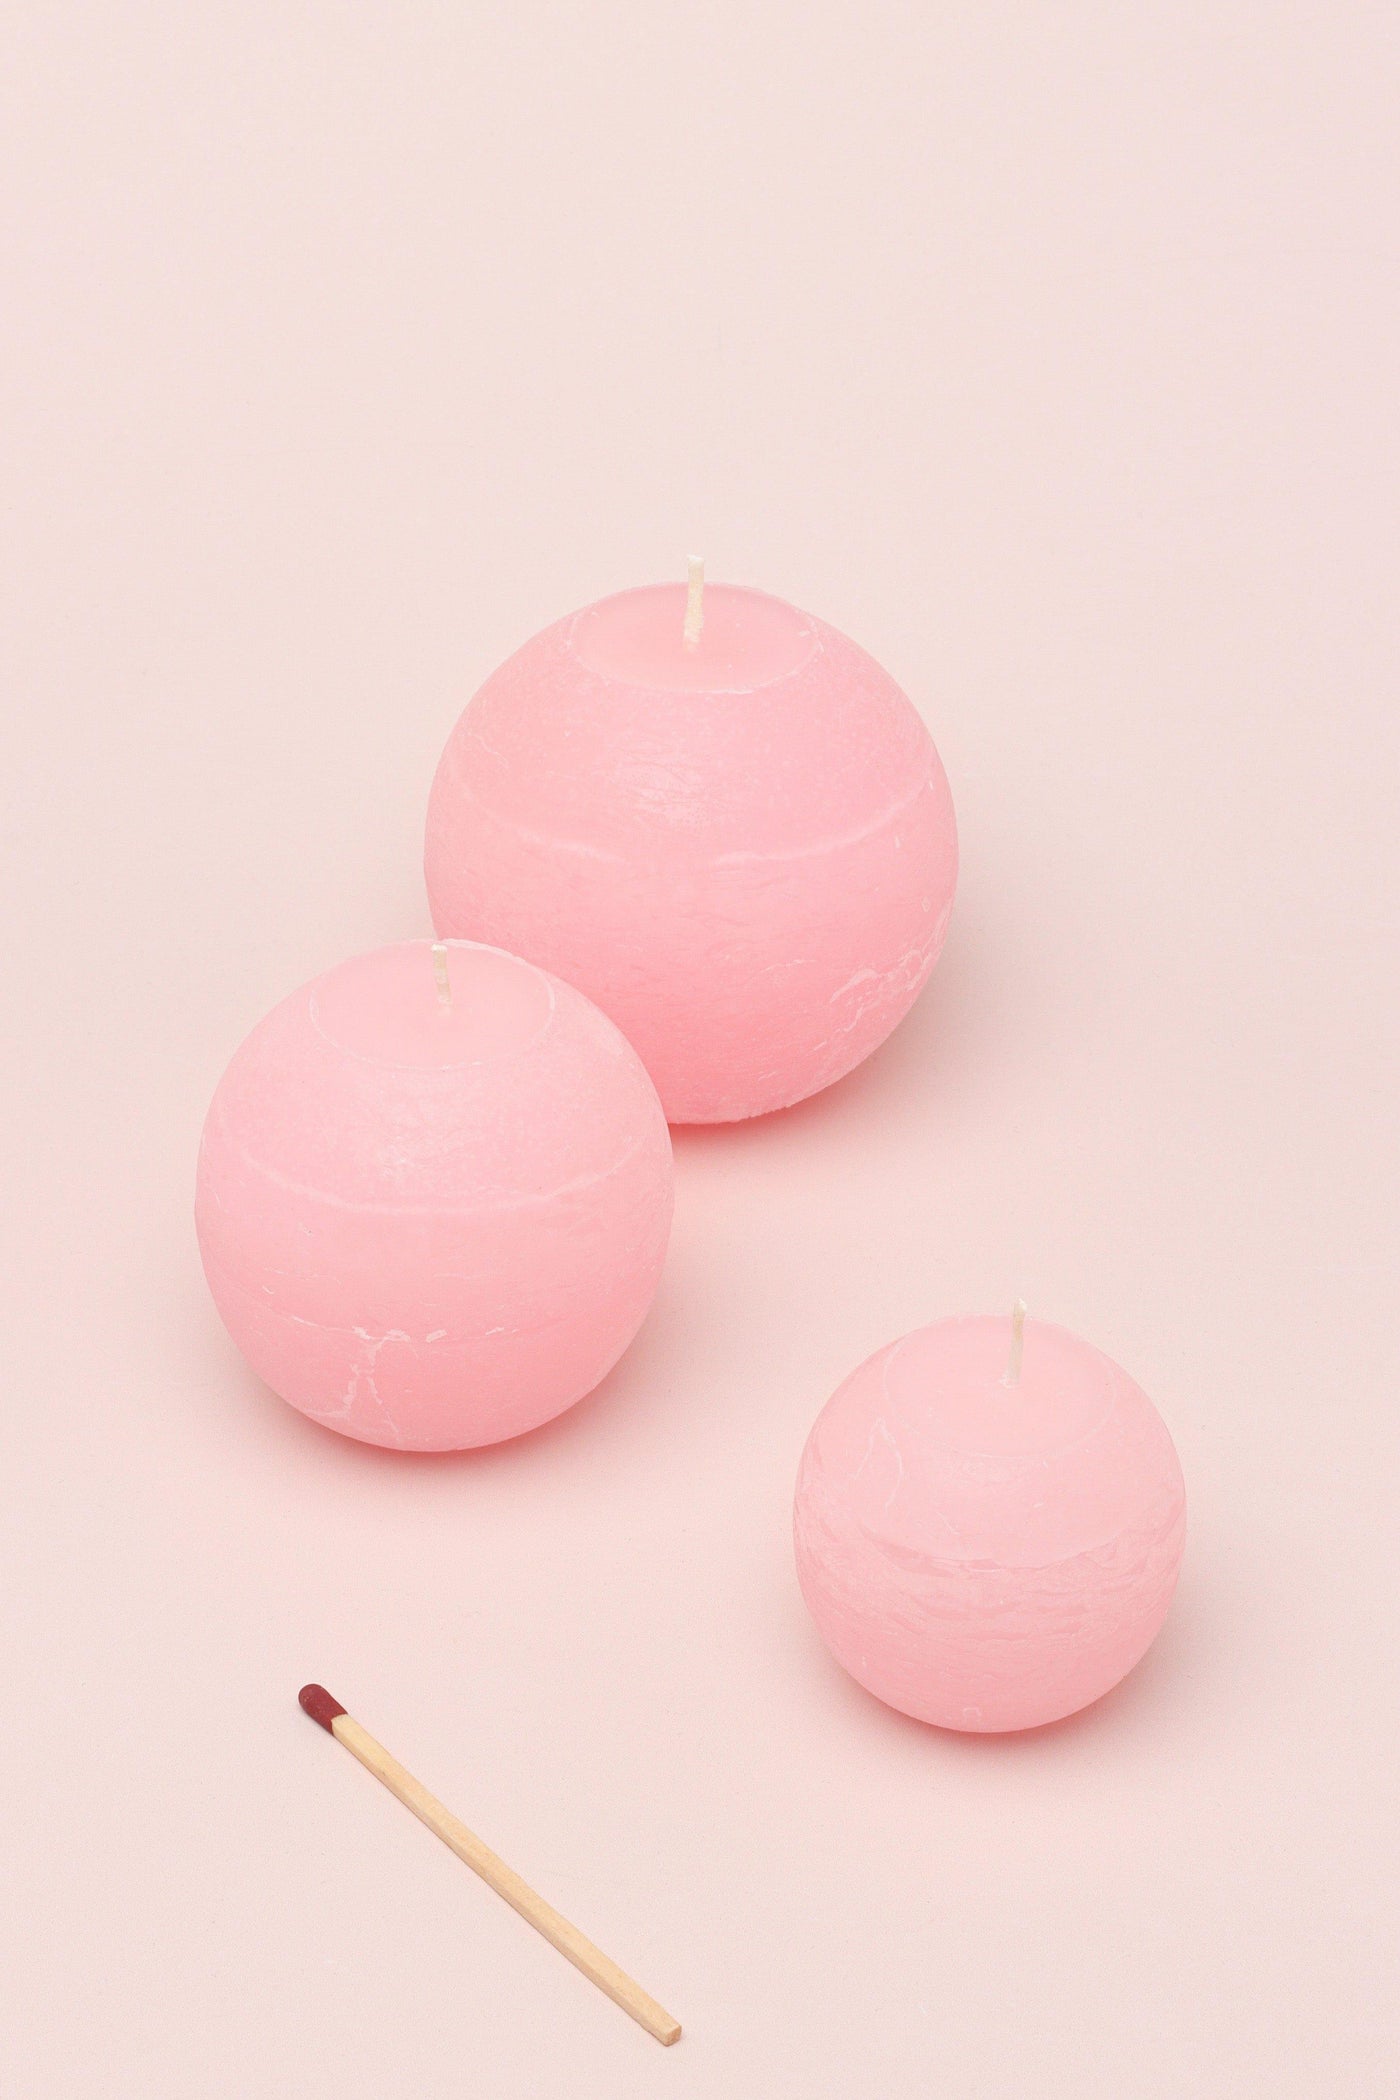 G Decor Candles Pink / Set Georgia Light Pink Ombre Sphere Ball Candles